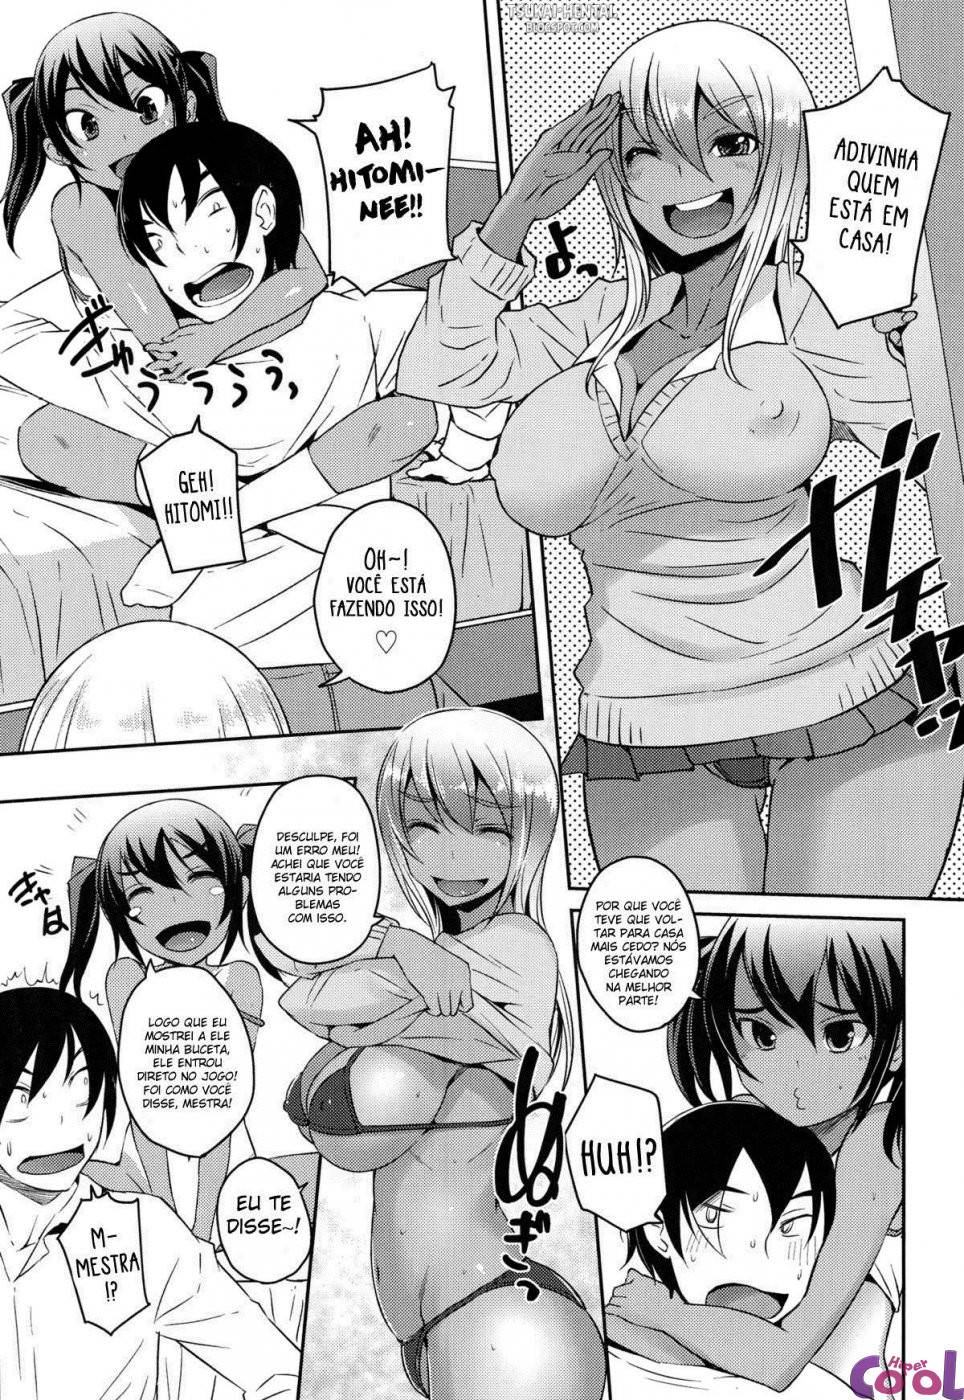 dangerous-sisters-chapter-01-page-07.jpg